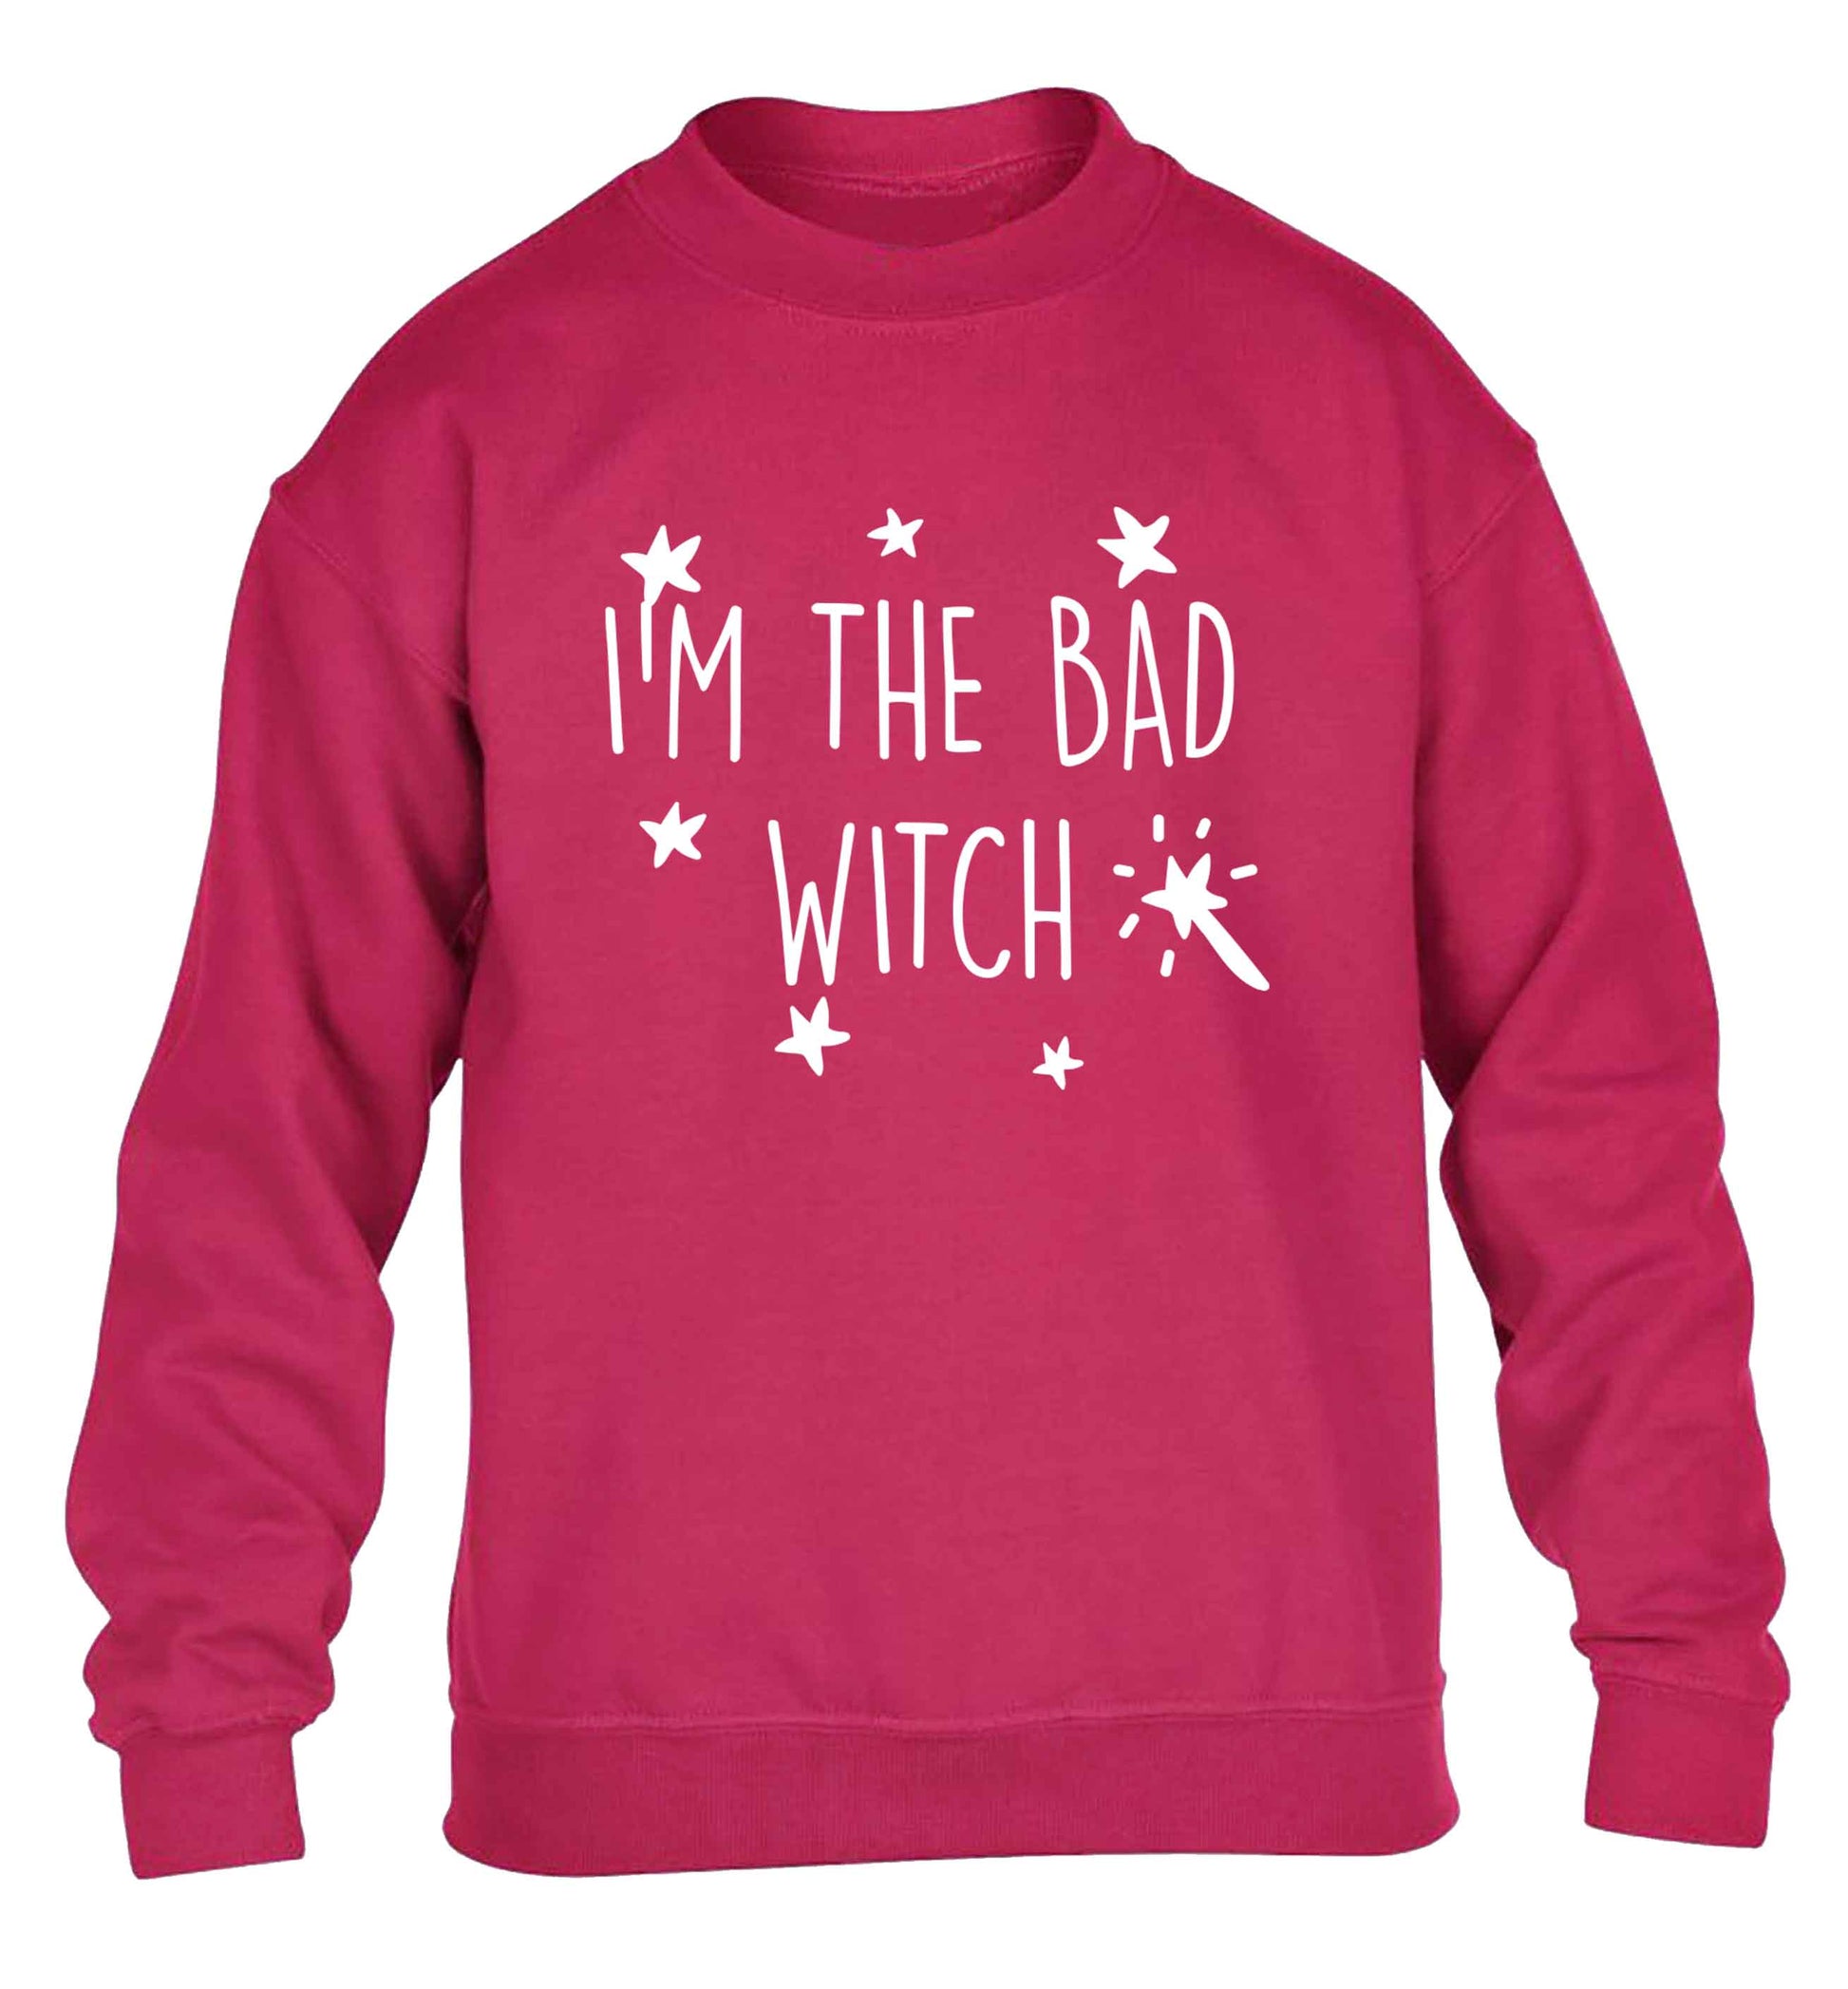 Bad witch children's pink sweater 12-13 Years